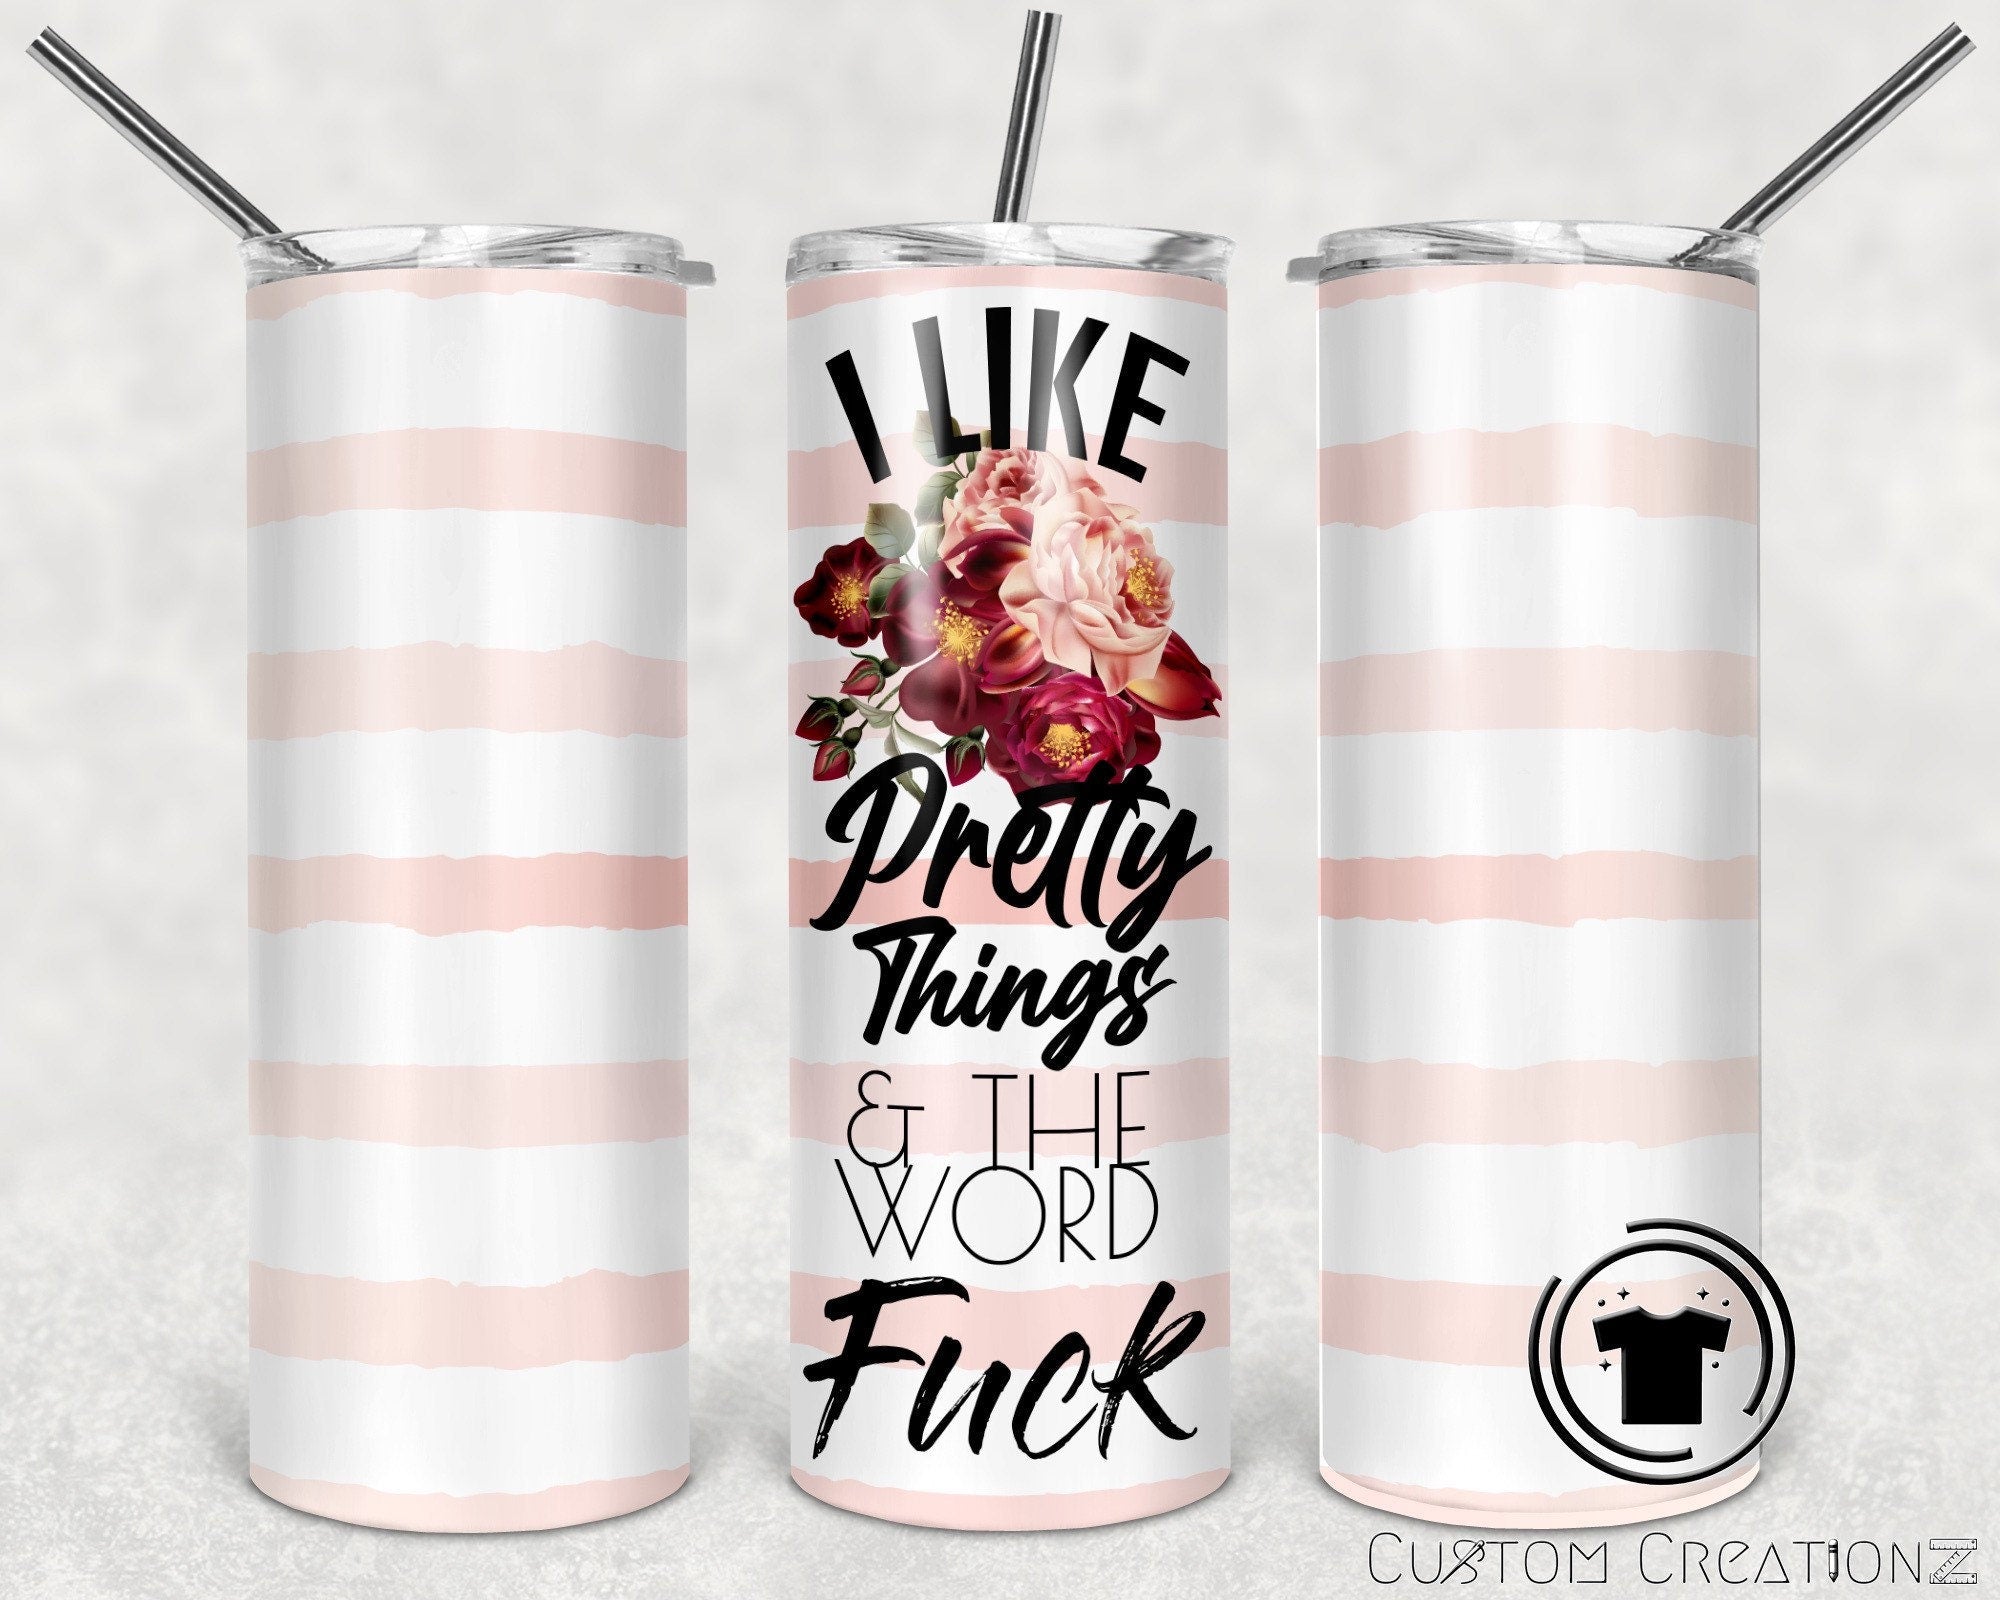 Stainless Steel 20oz. Tumbler with metal straw - Pretty things - Birthday - Mother's Day - Grandma - Nana - abuela - mom - aunt - Godmother